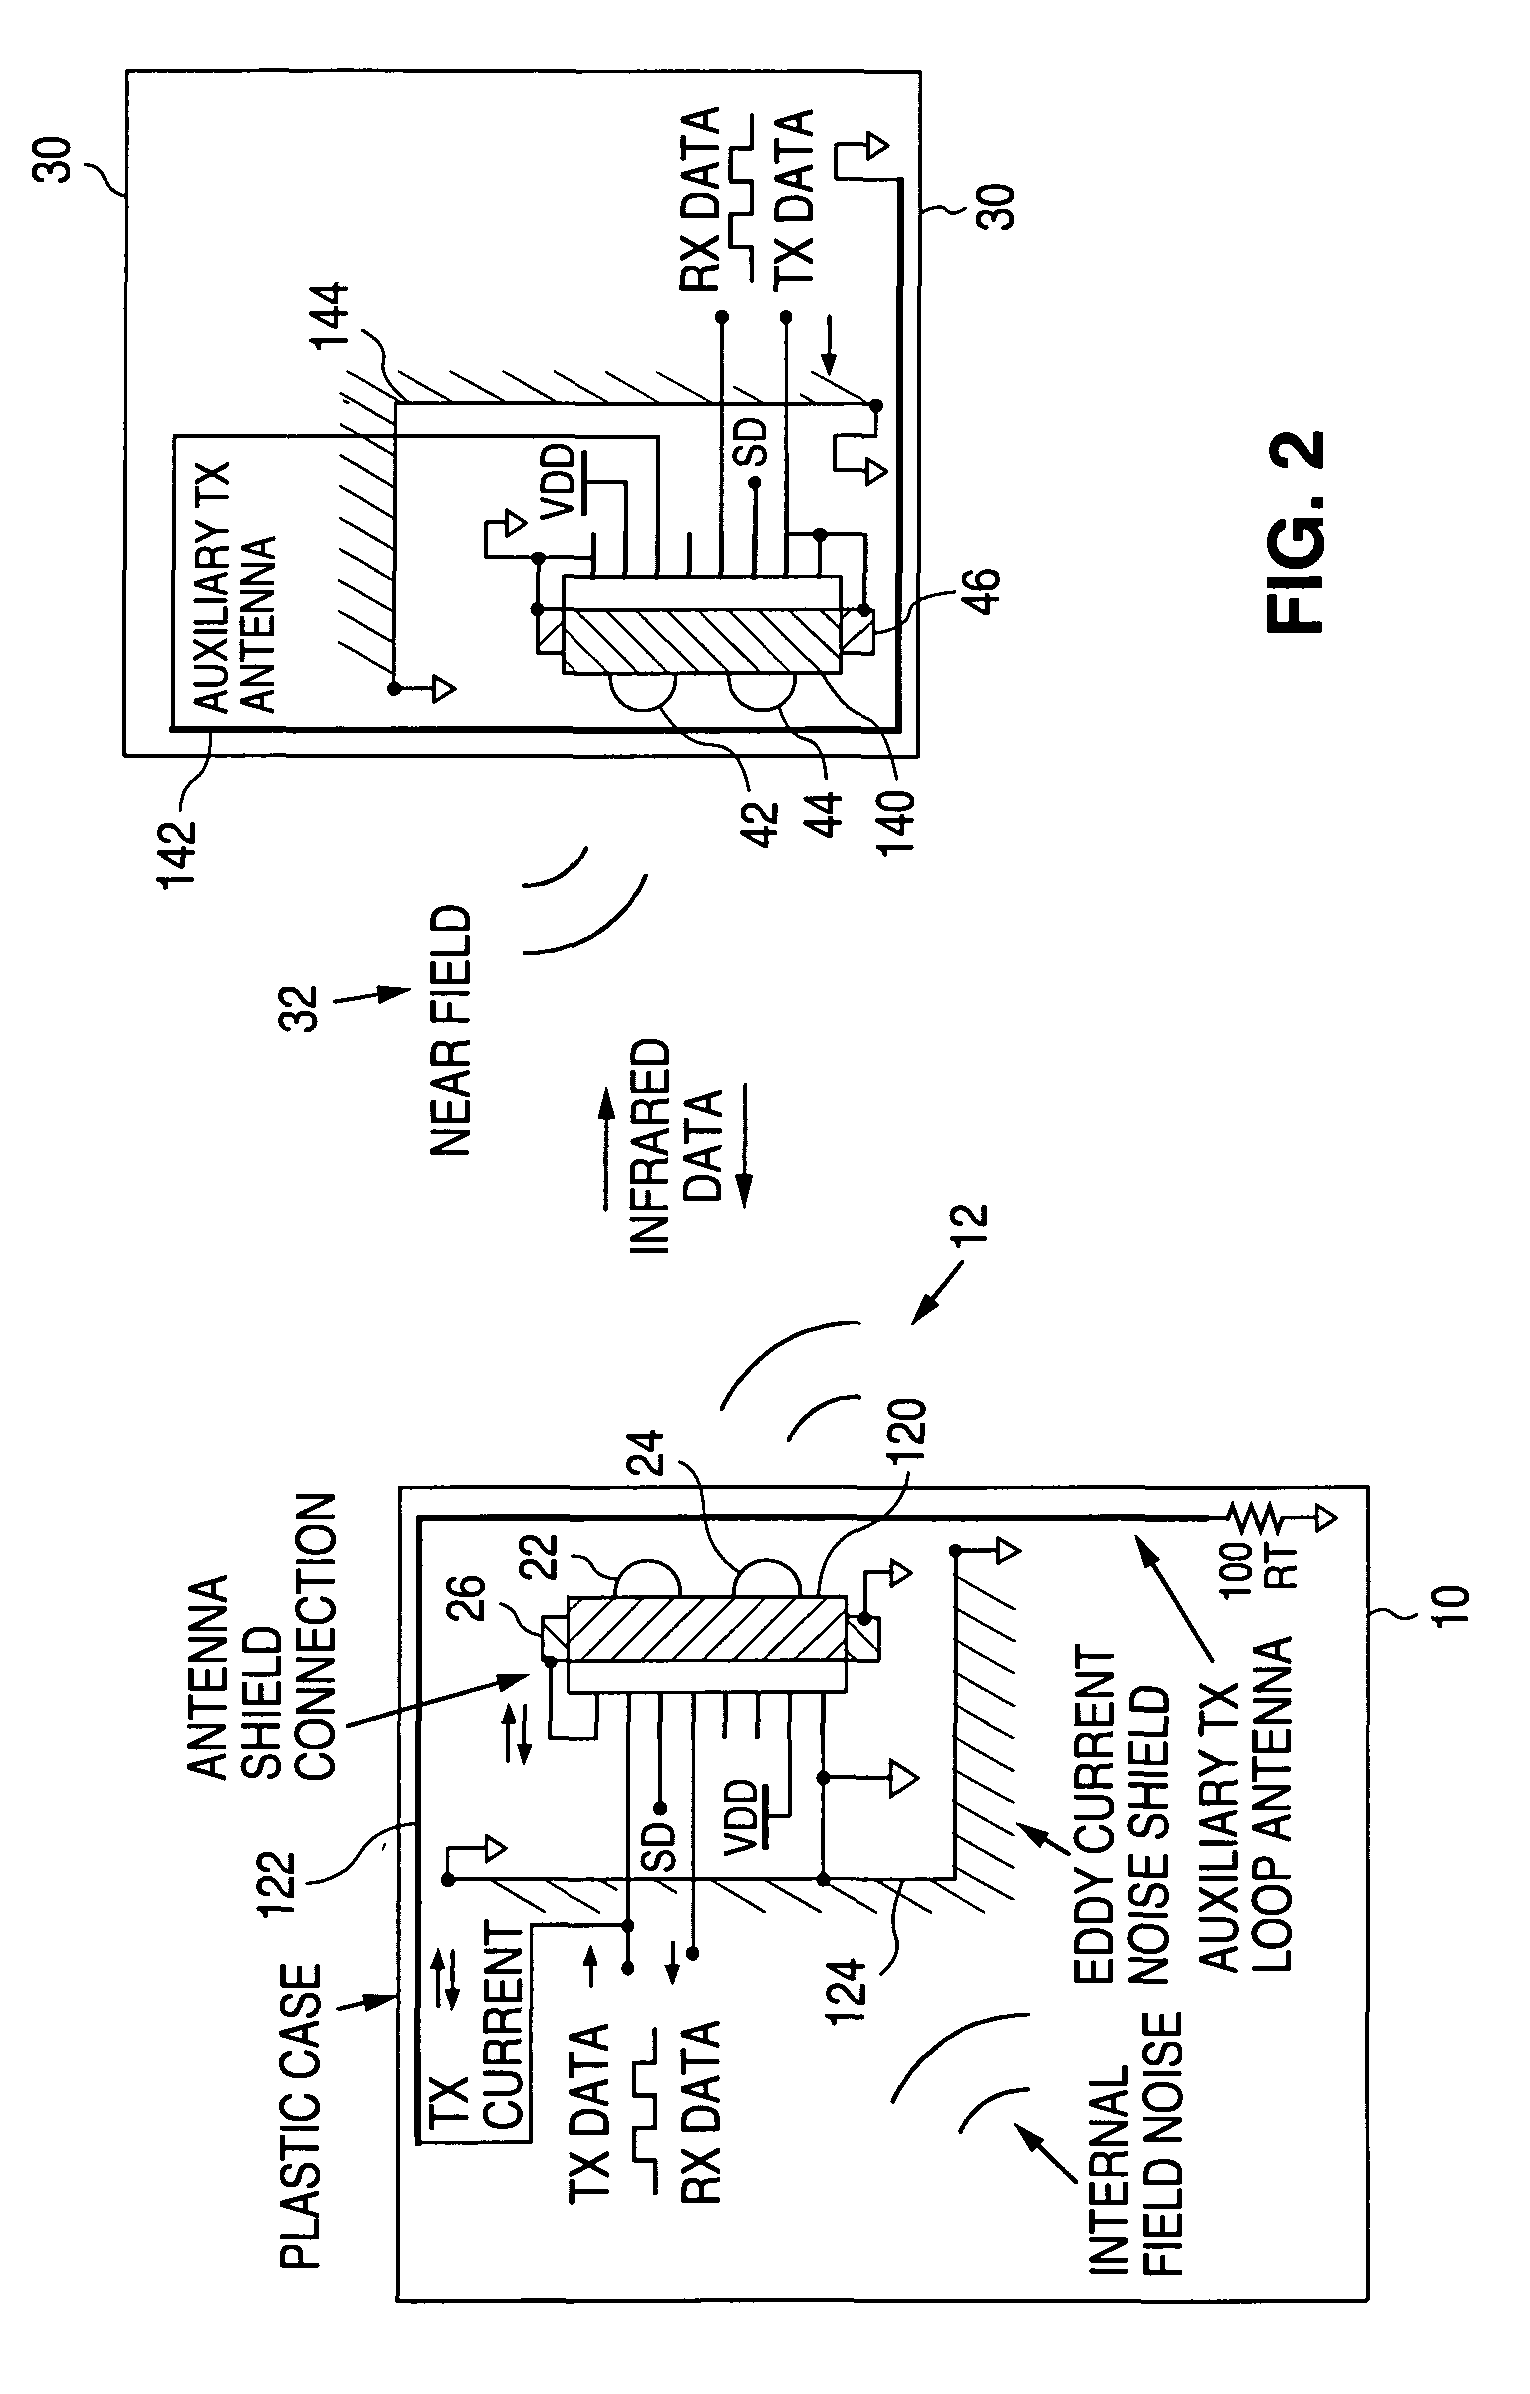 Apparatus and method for near-field communication